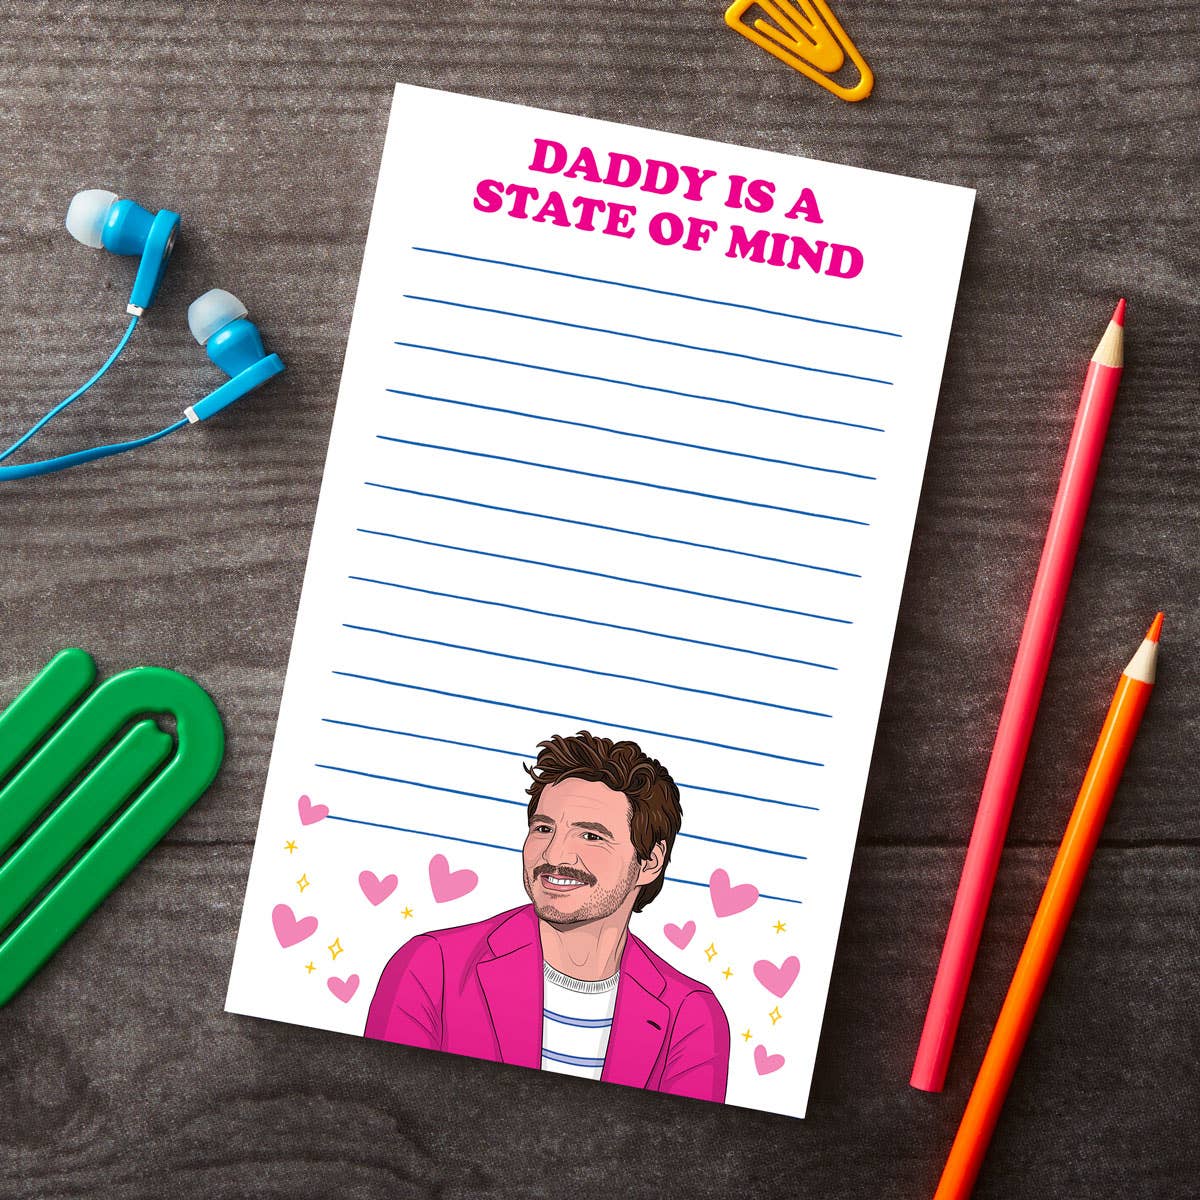 Pedro Pascal “Daddy is a State of Mind” Notepad